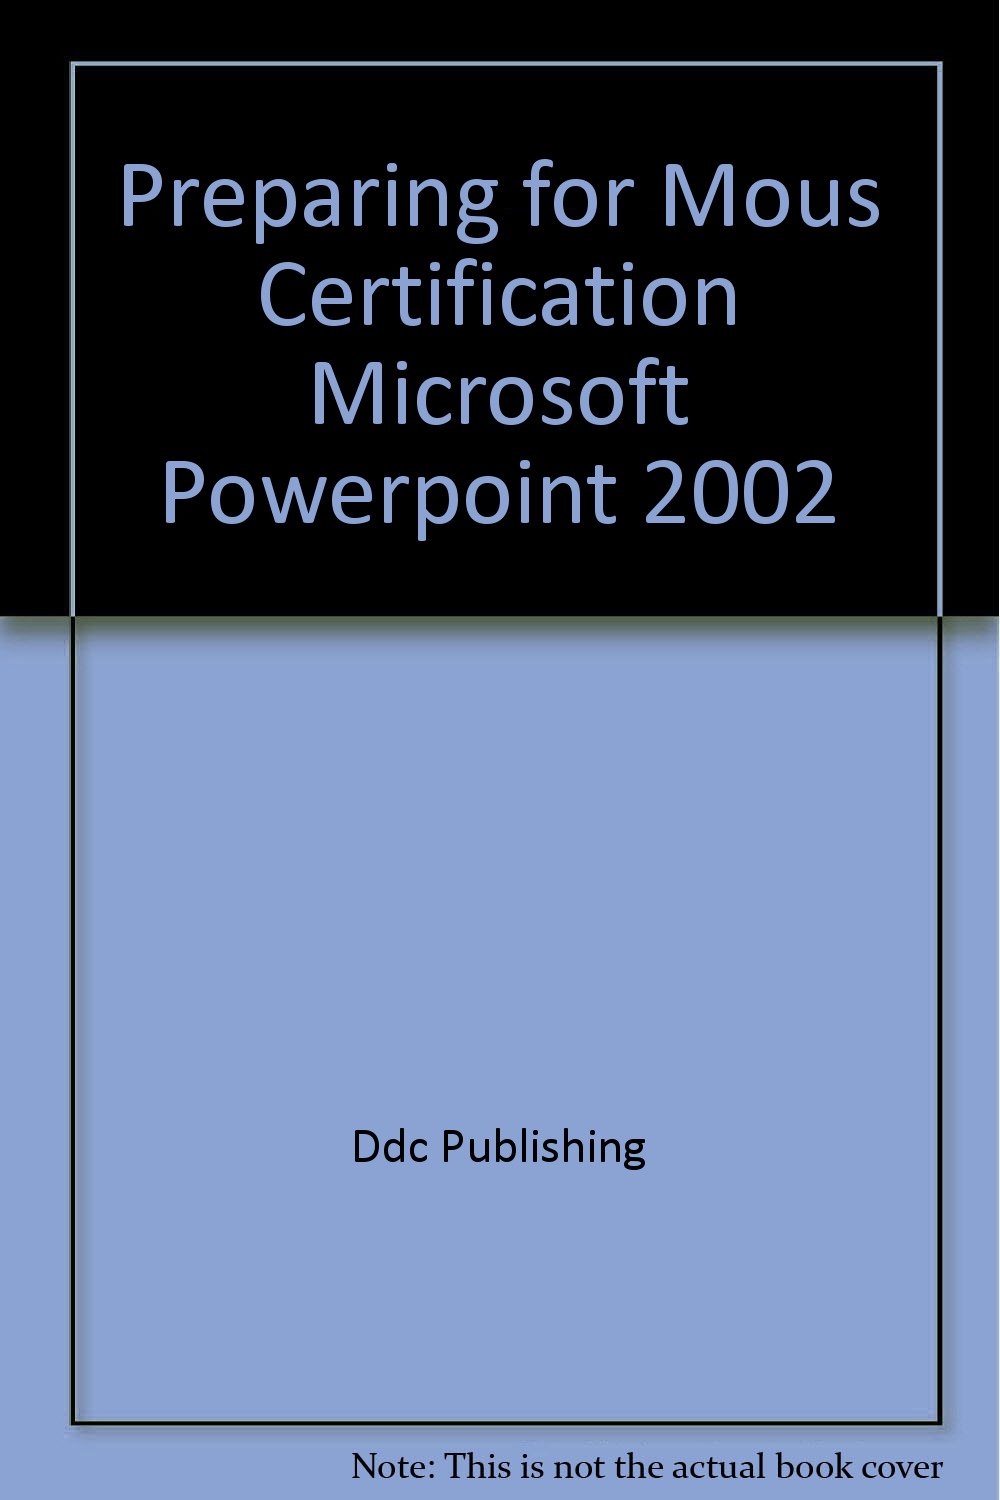 MOUS Powerpoint 2002